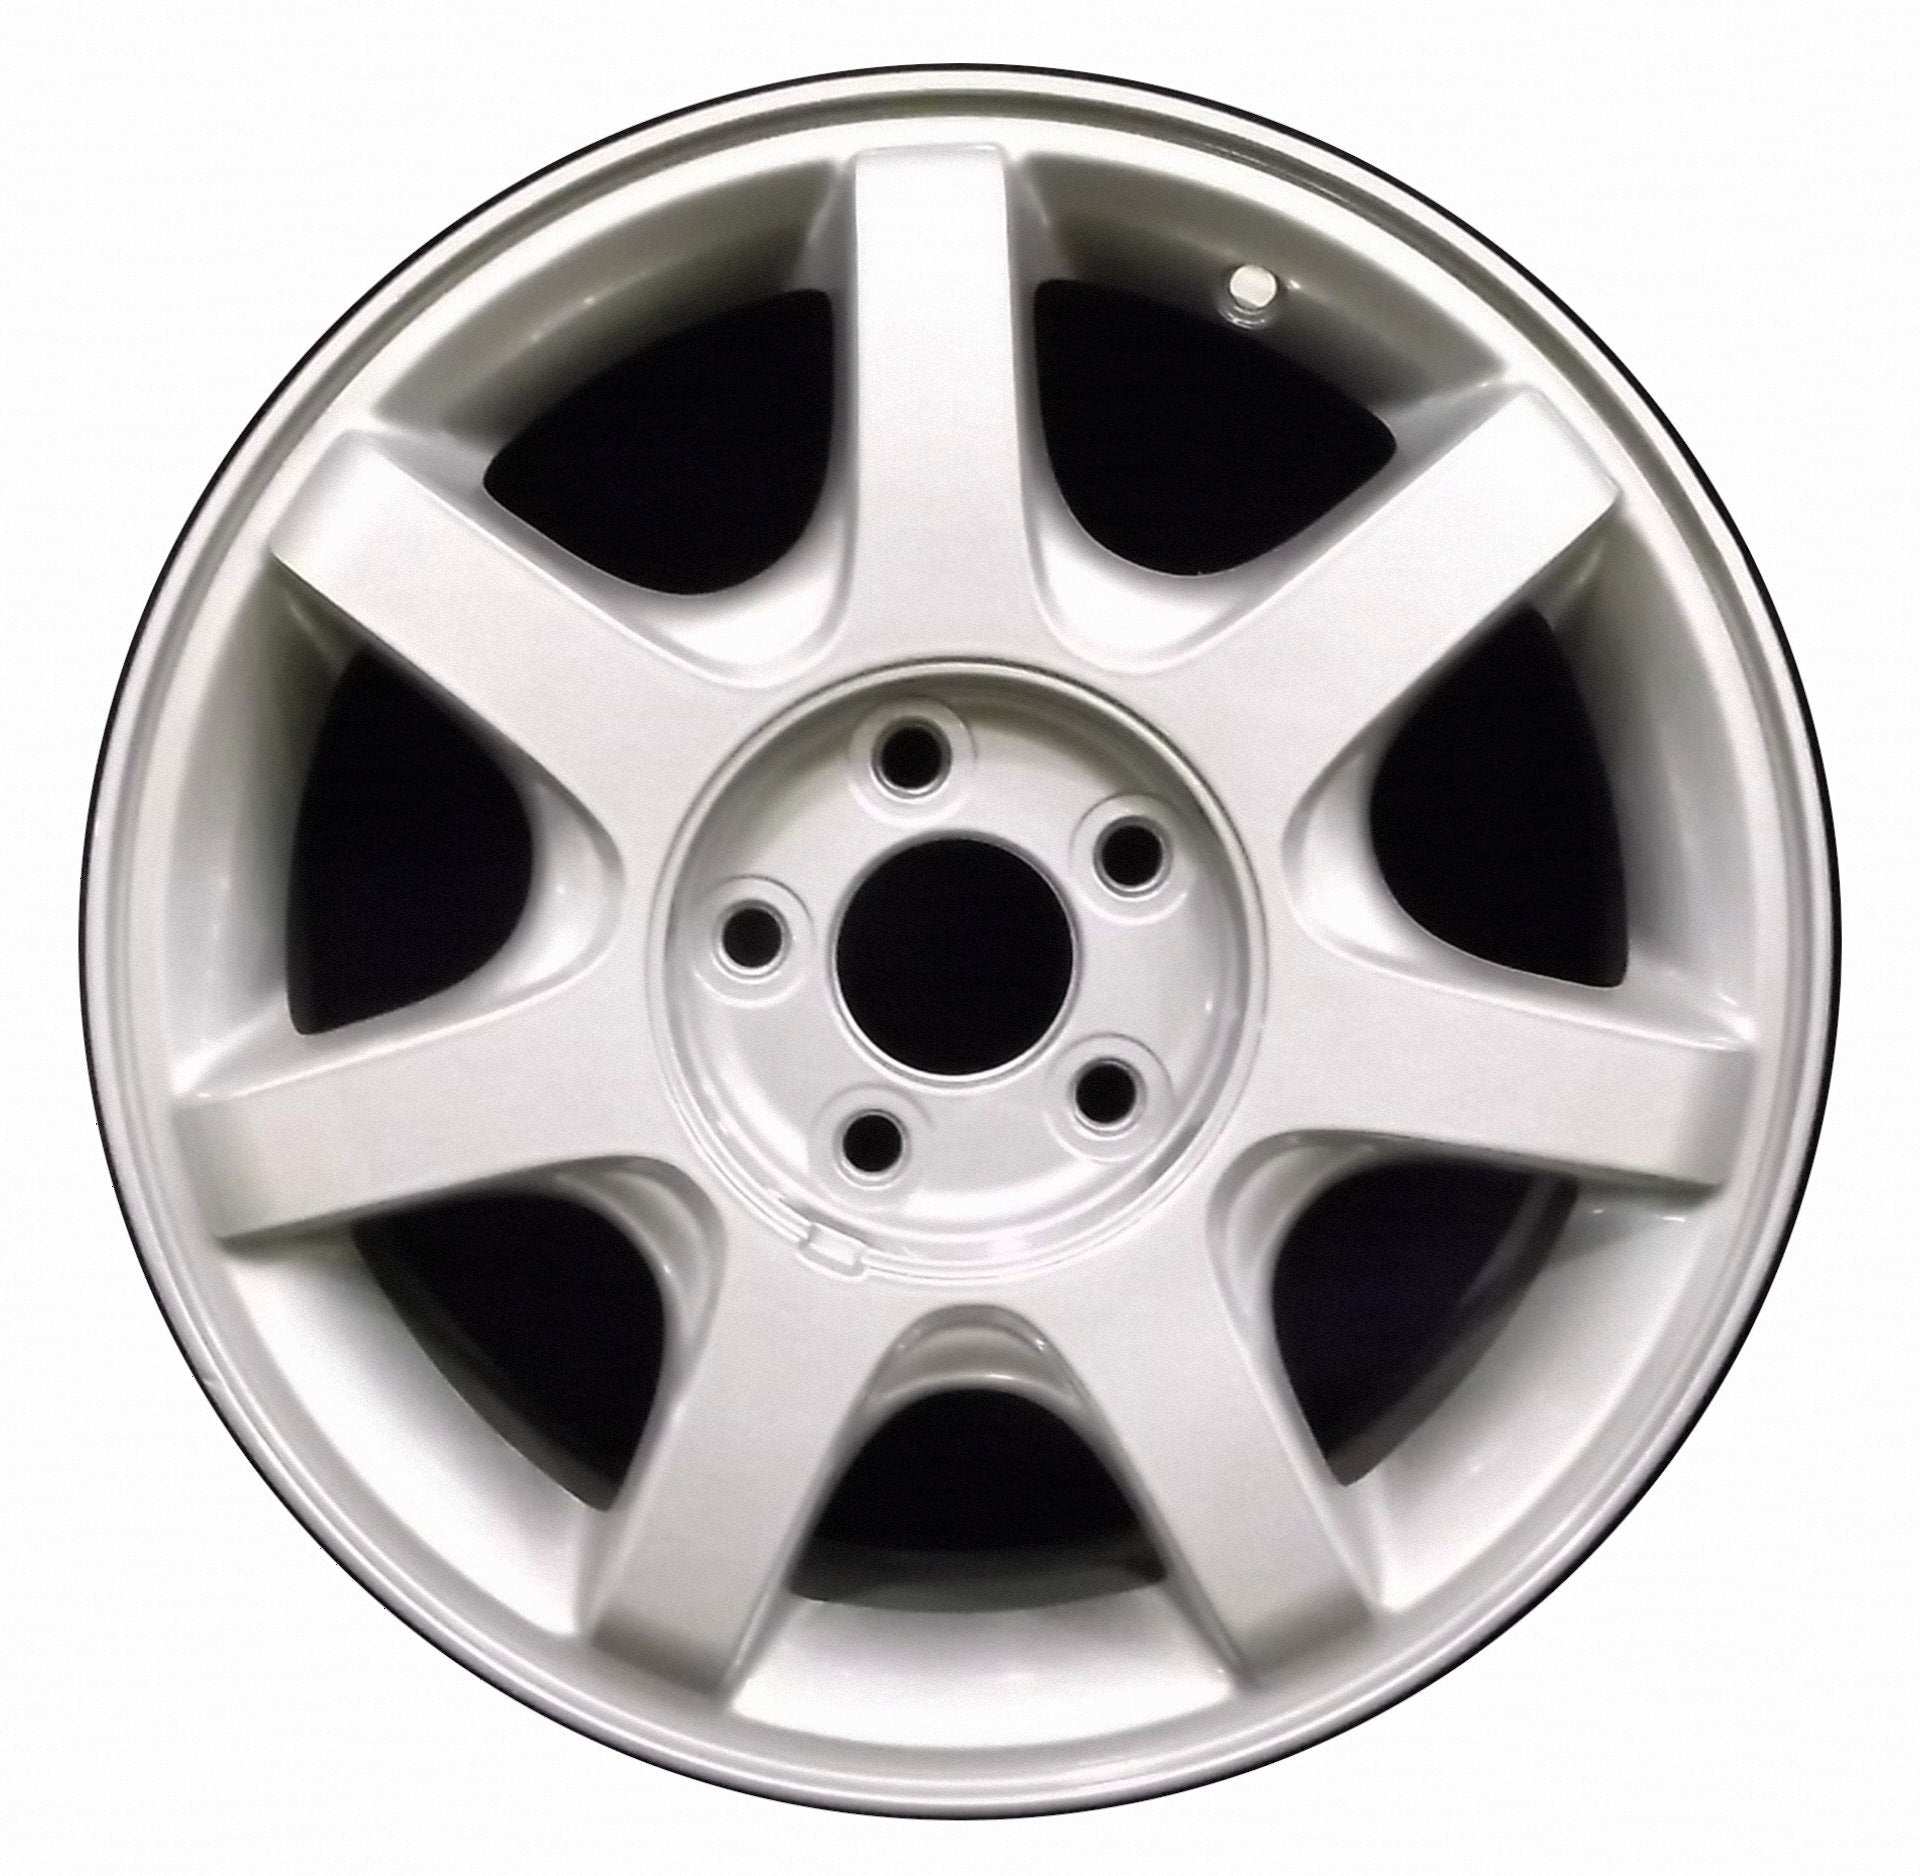 Ford Taurus  2000, 2001, 2002, 2003, 2004, 2005, 2006, 2007 Factory OEM Car Wheel Size 16x6 Alloy WAO.3360.PS02.FF